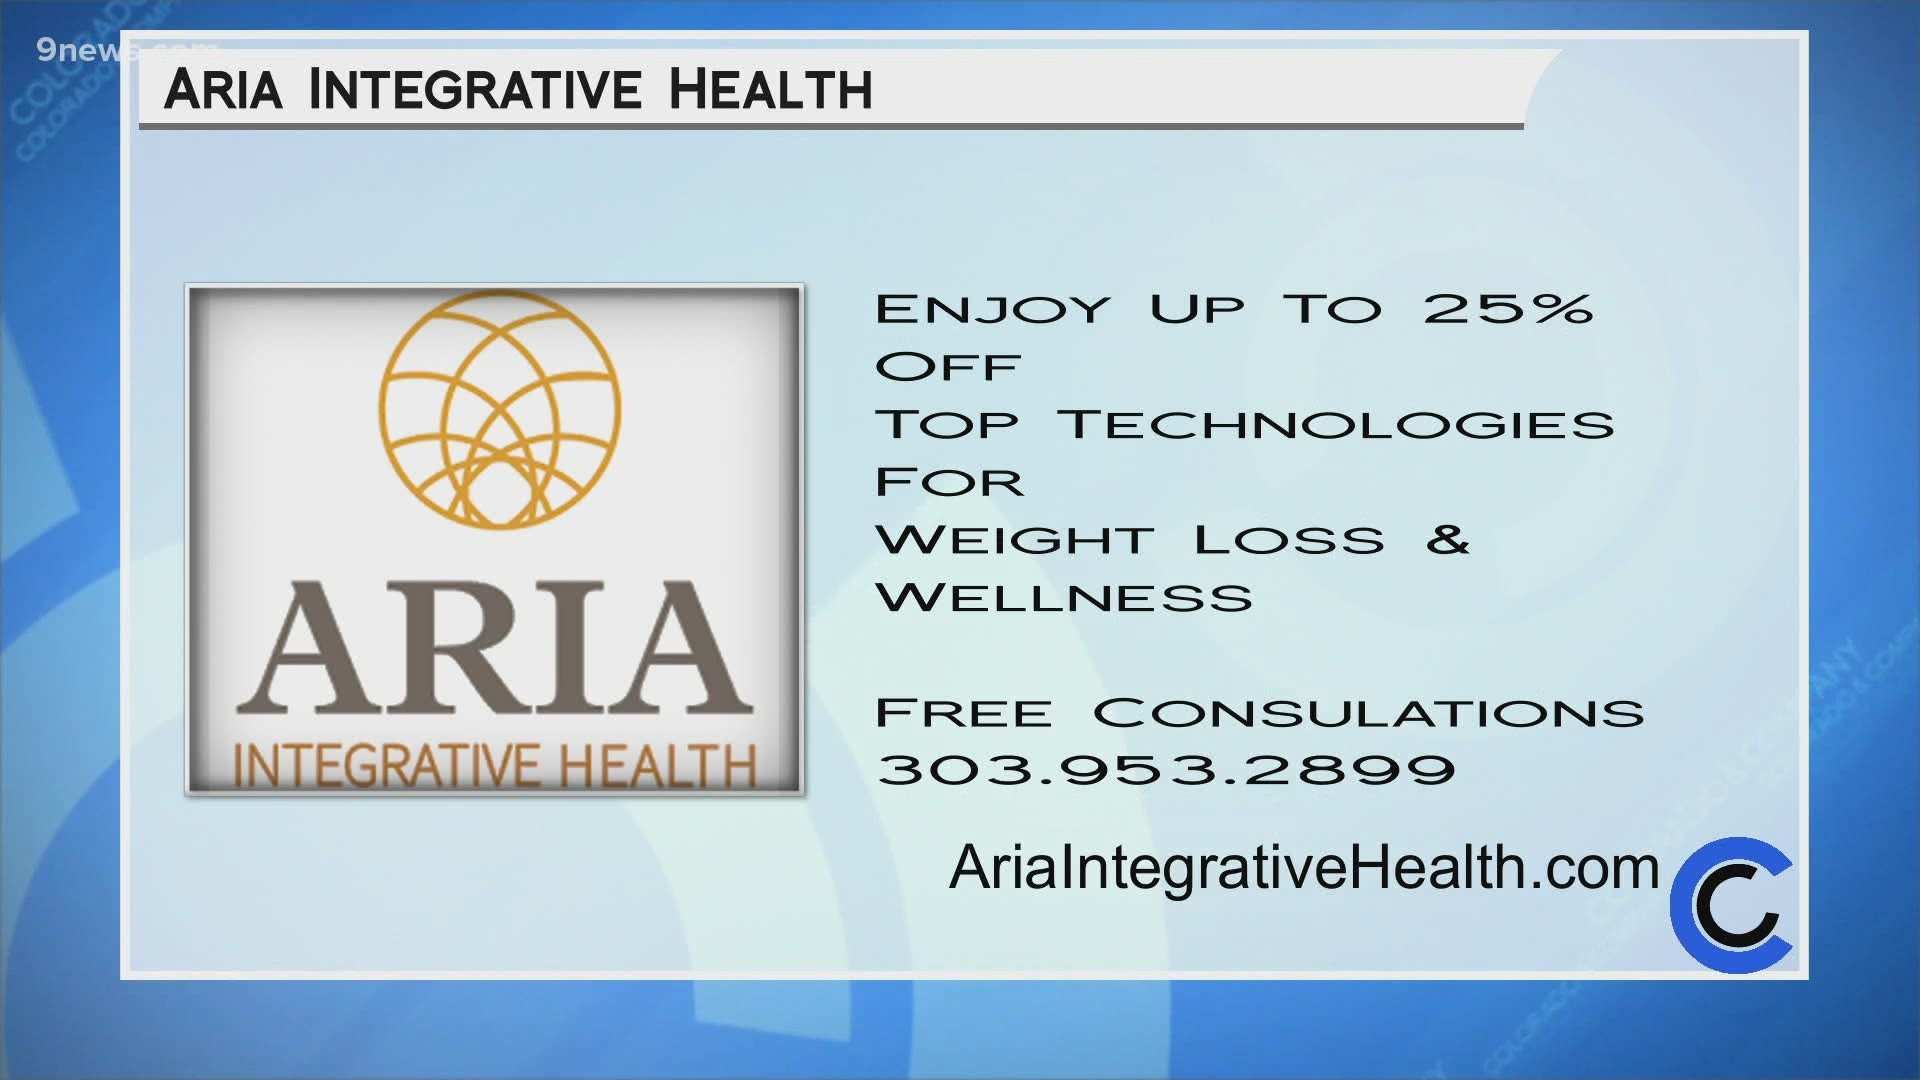 Take 25% off on several top techs right now for a limited time! Learn more at AriaIntegrativeHealth.com or call 303.953.2899 to get started.